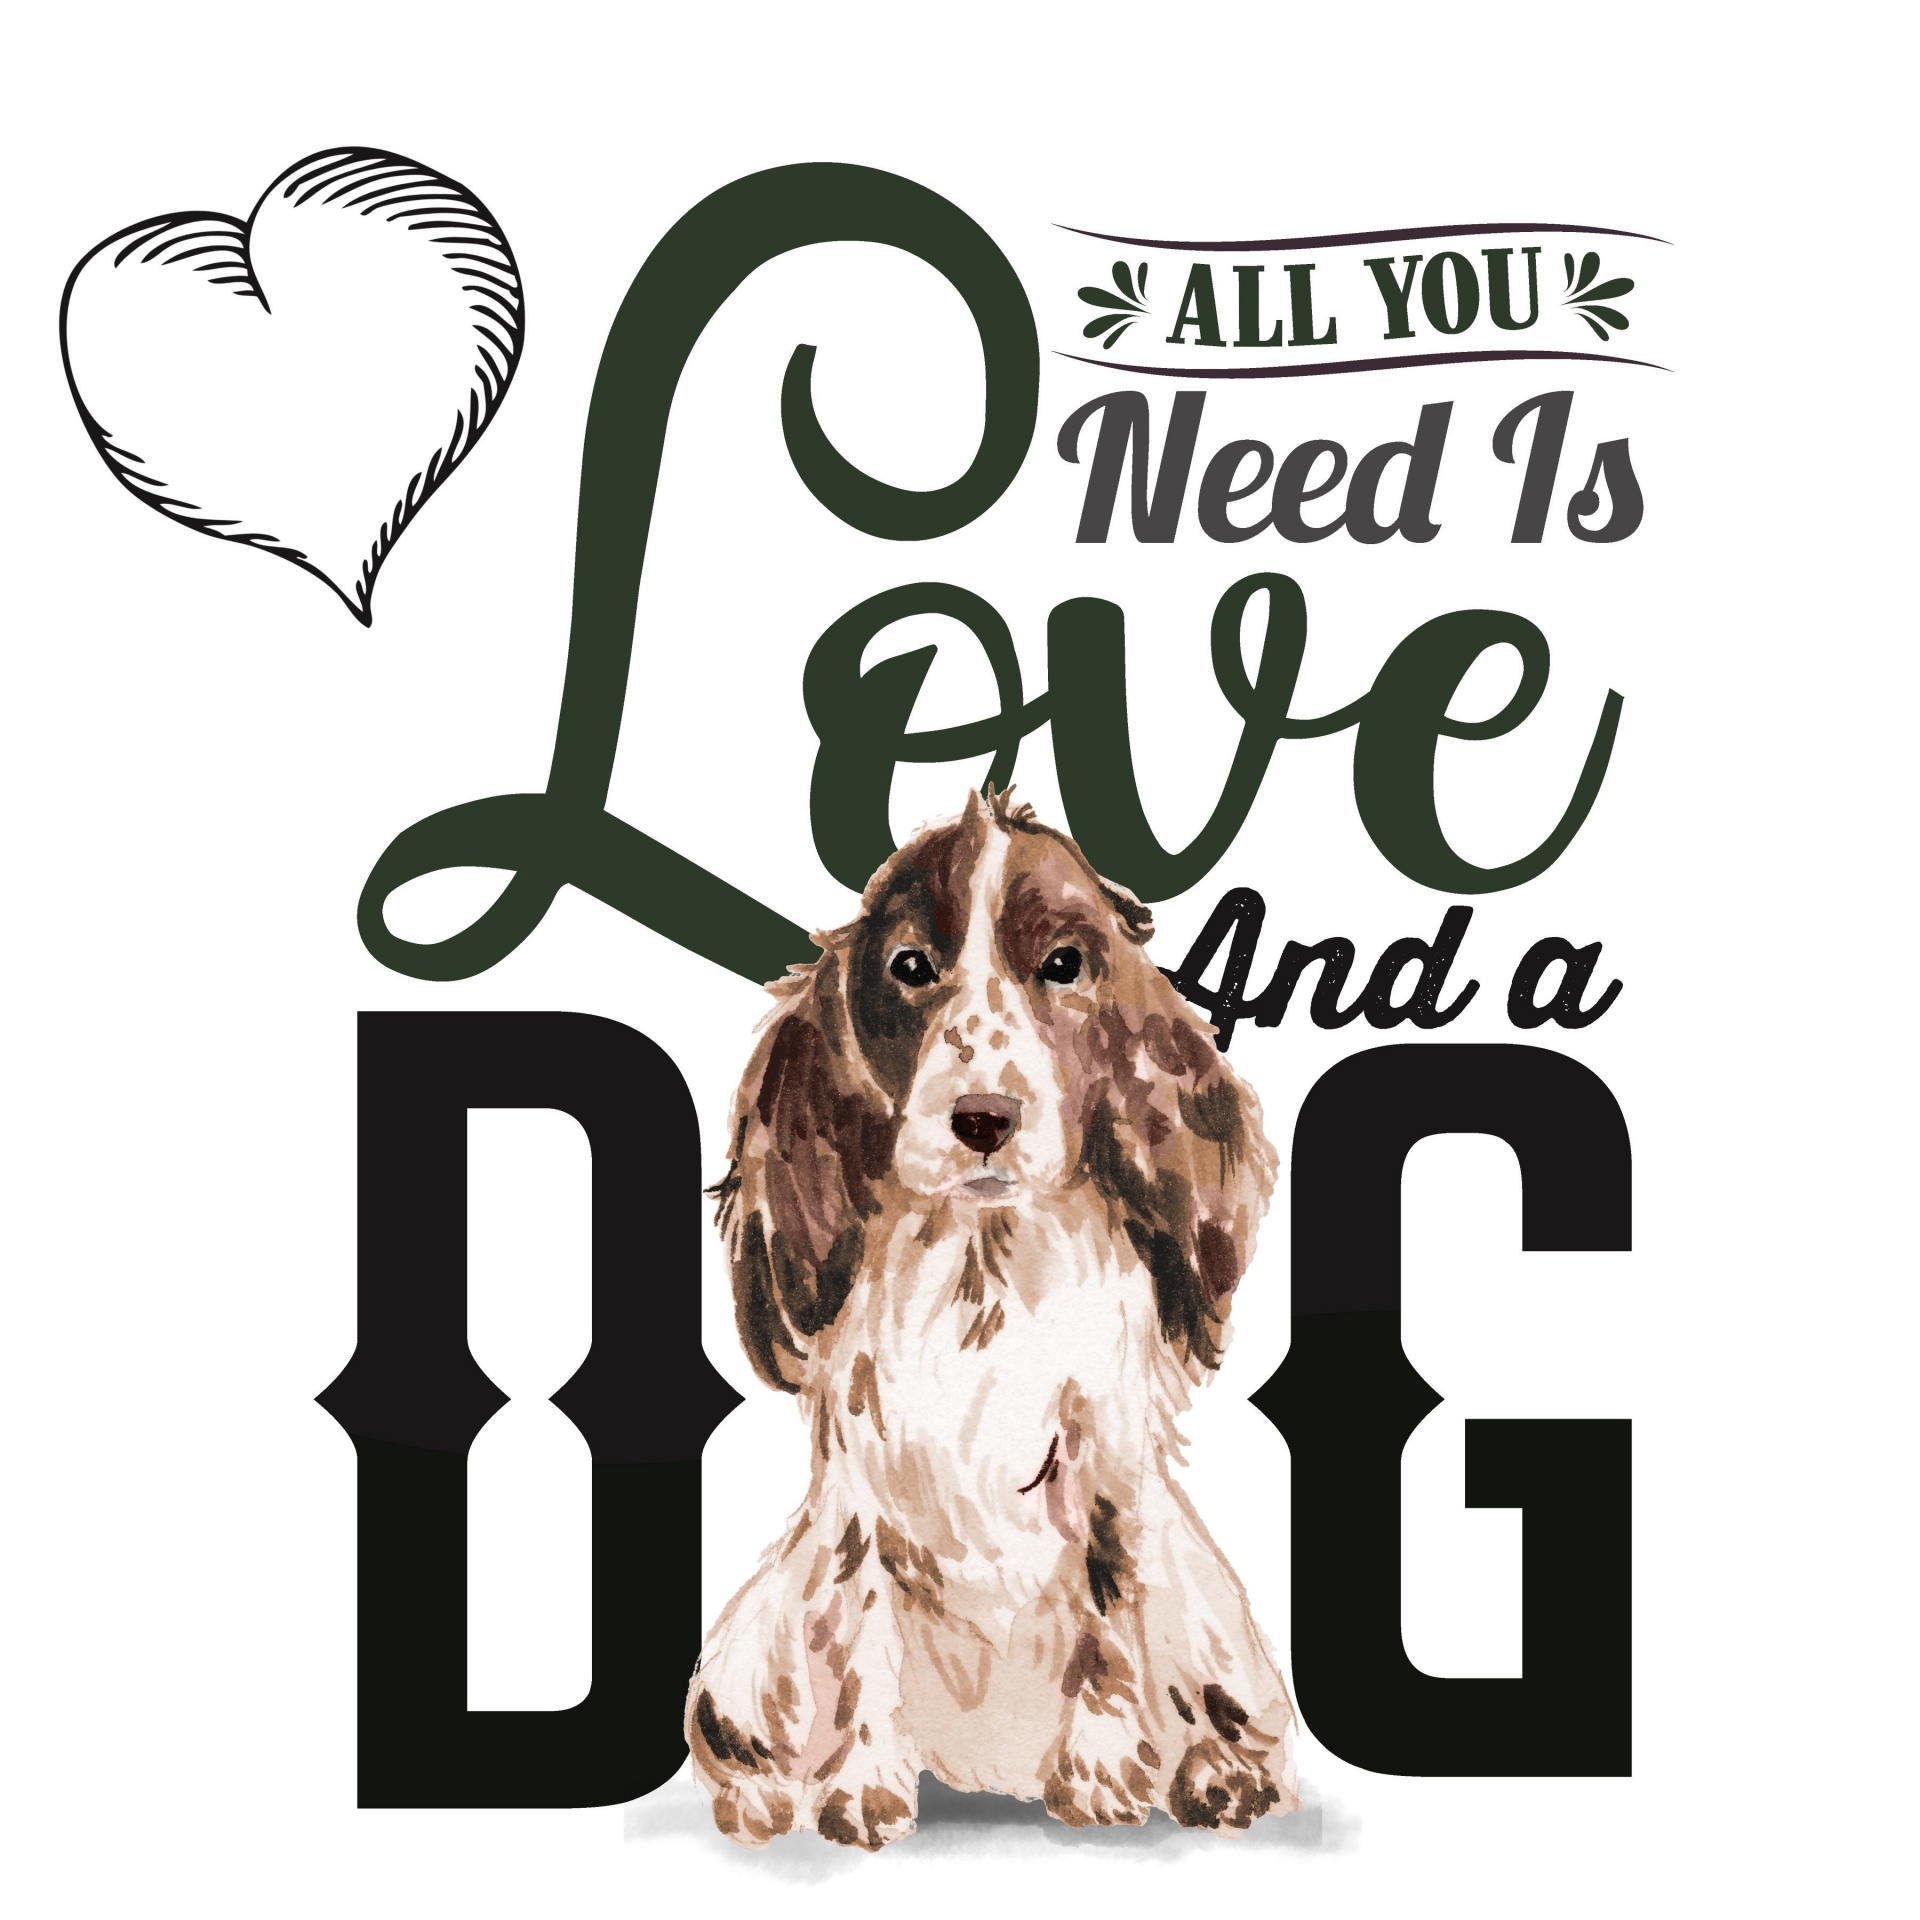 All You Need is Love and a Dog illustration